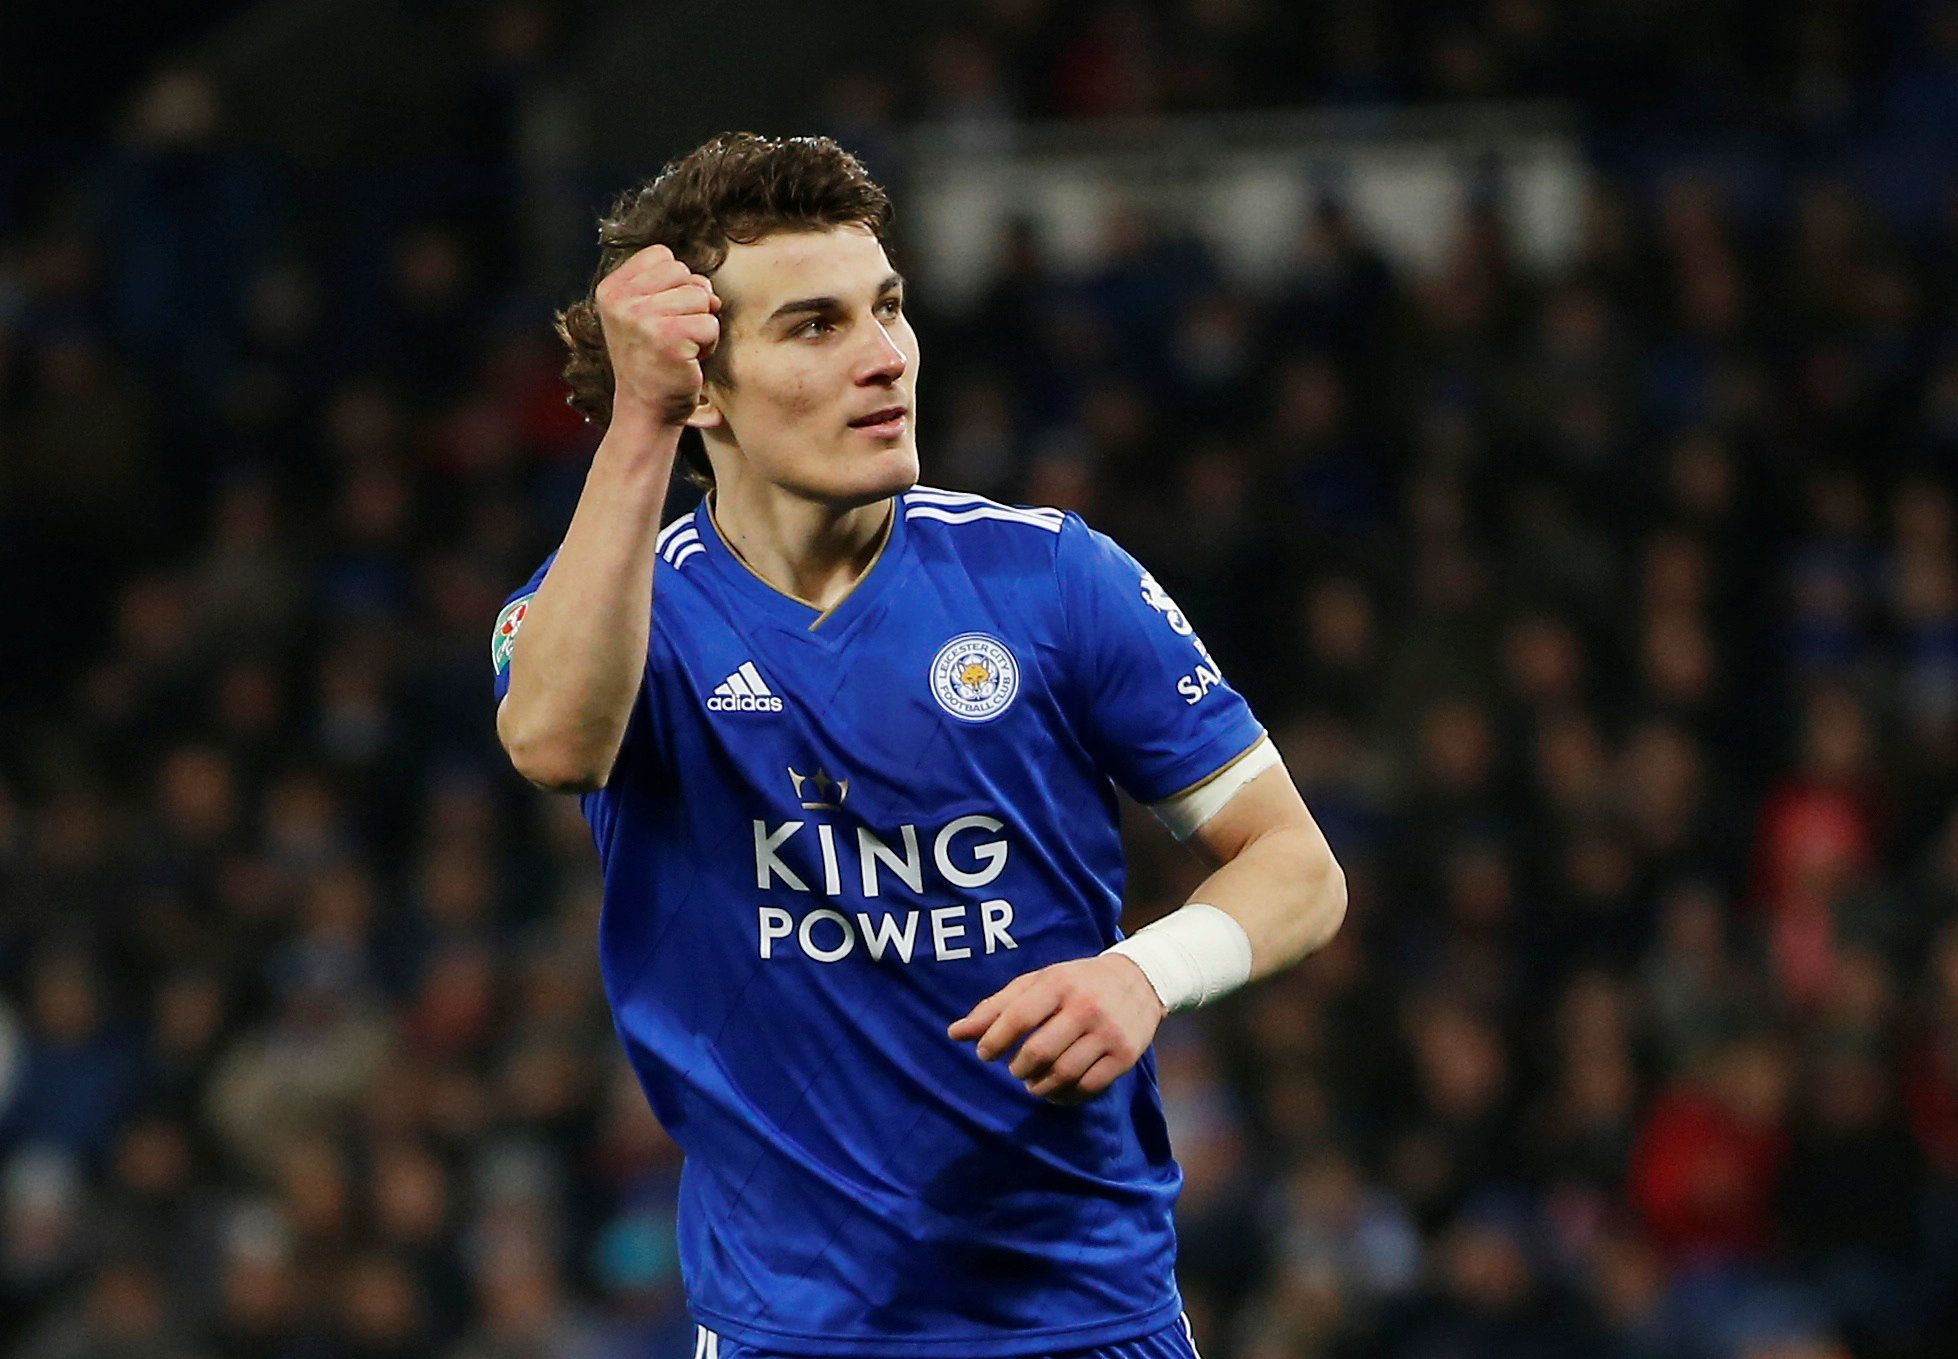 Soccer Football - Carabao Cup Fourth Round - Leicester City v Southampton - King Power Stadium, Leicester, Britain - November 27, 2018  Leicester City's Caglar Soyuncu celebrates scoring a penalty during the shootout       Action Images via Reuters/Craig Brough  EDITORIAL USE ONLY. No use with unauthorized audio, video, data, fixture lists, club/league logos or 